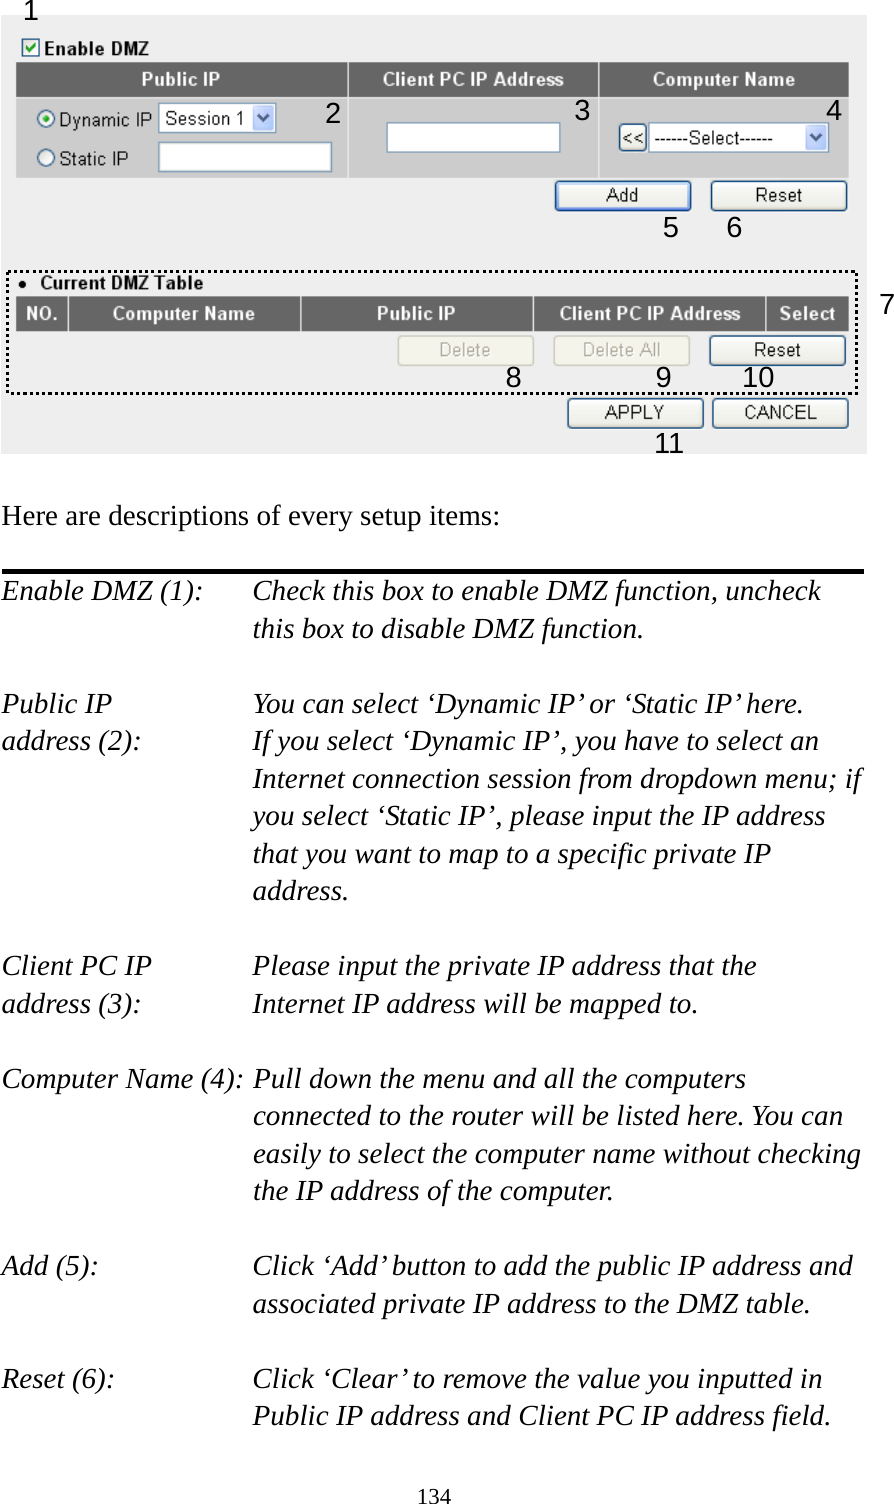 134   Here are descriptions of every setup items:  Enable DMZ (1):    Check this box to enable DMZ function, uncheck this box to disable DMZ function.  Public IP        You can select ‘Dynamic IP’ or ‘Static IP’ here. address (2):    If you select ‘Dynamic IP’, you have to select an Internet connection session from dropdown menu; if you select ‘Static IP’, please input the IP address that you want to map to a specific private IP address.  Client PC IP      Please input the private IP address that the address (3):      Internet IP address will be mapped to.  Computer Name (4): Pull down the menu and all the computers connected to the router will be listed here. You can easily to select the computer name without checking the IP address of the computer.  Add (5):    Click ‘Add’ button to add the public IP address and associated private IP address to the DMZ table.  Reset (6):    Click ‘Clear’ to remove the value you inputted in Public IP address and Client PC IP address field. 1 2456 78 9 10 113